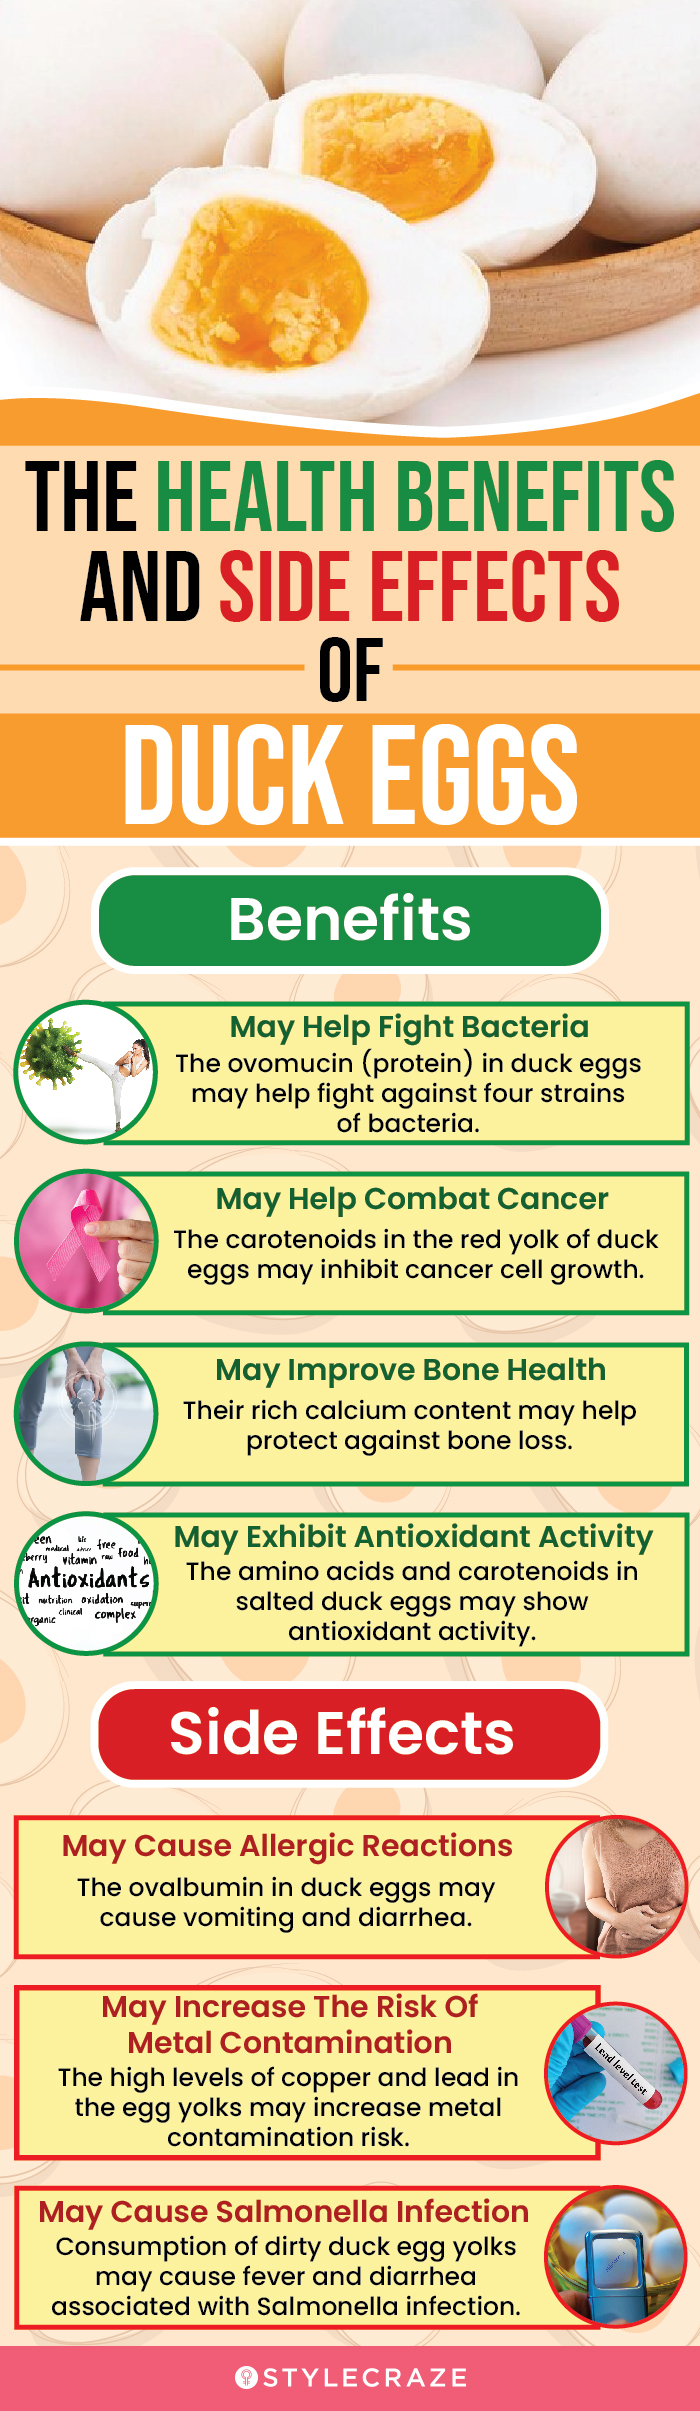 the health benefits and side effects of duck eggs (infographic)